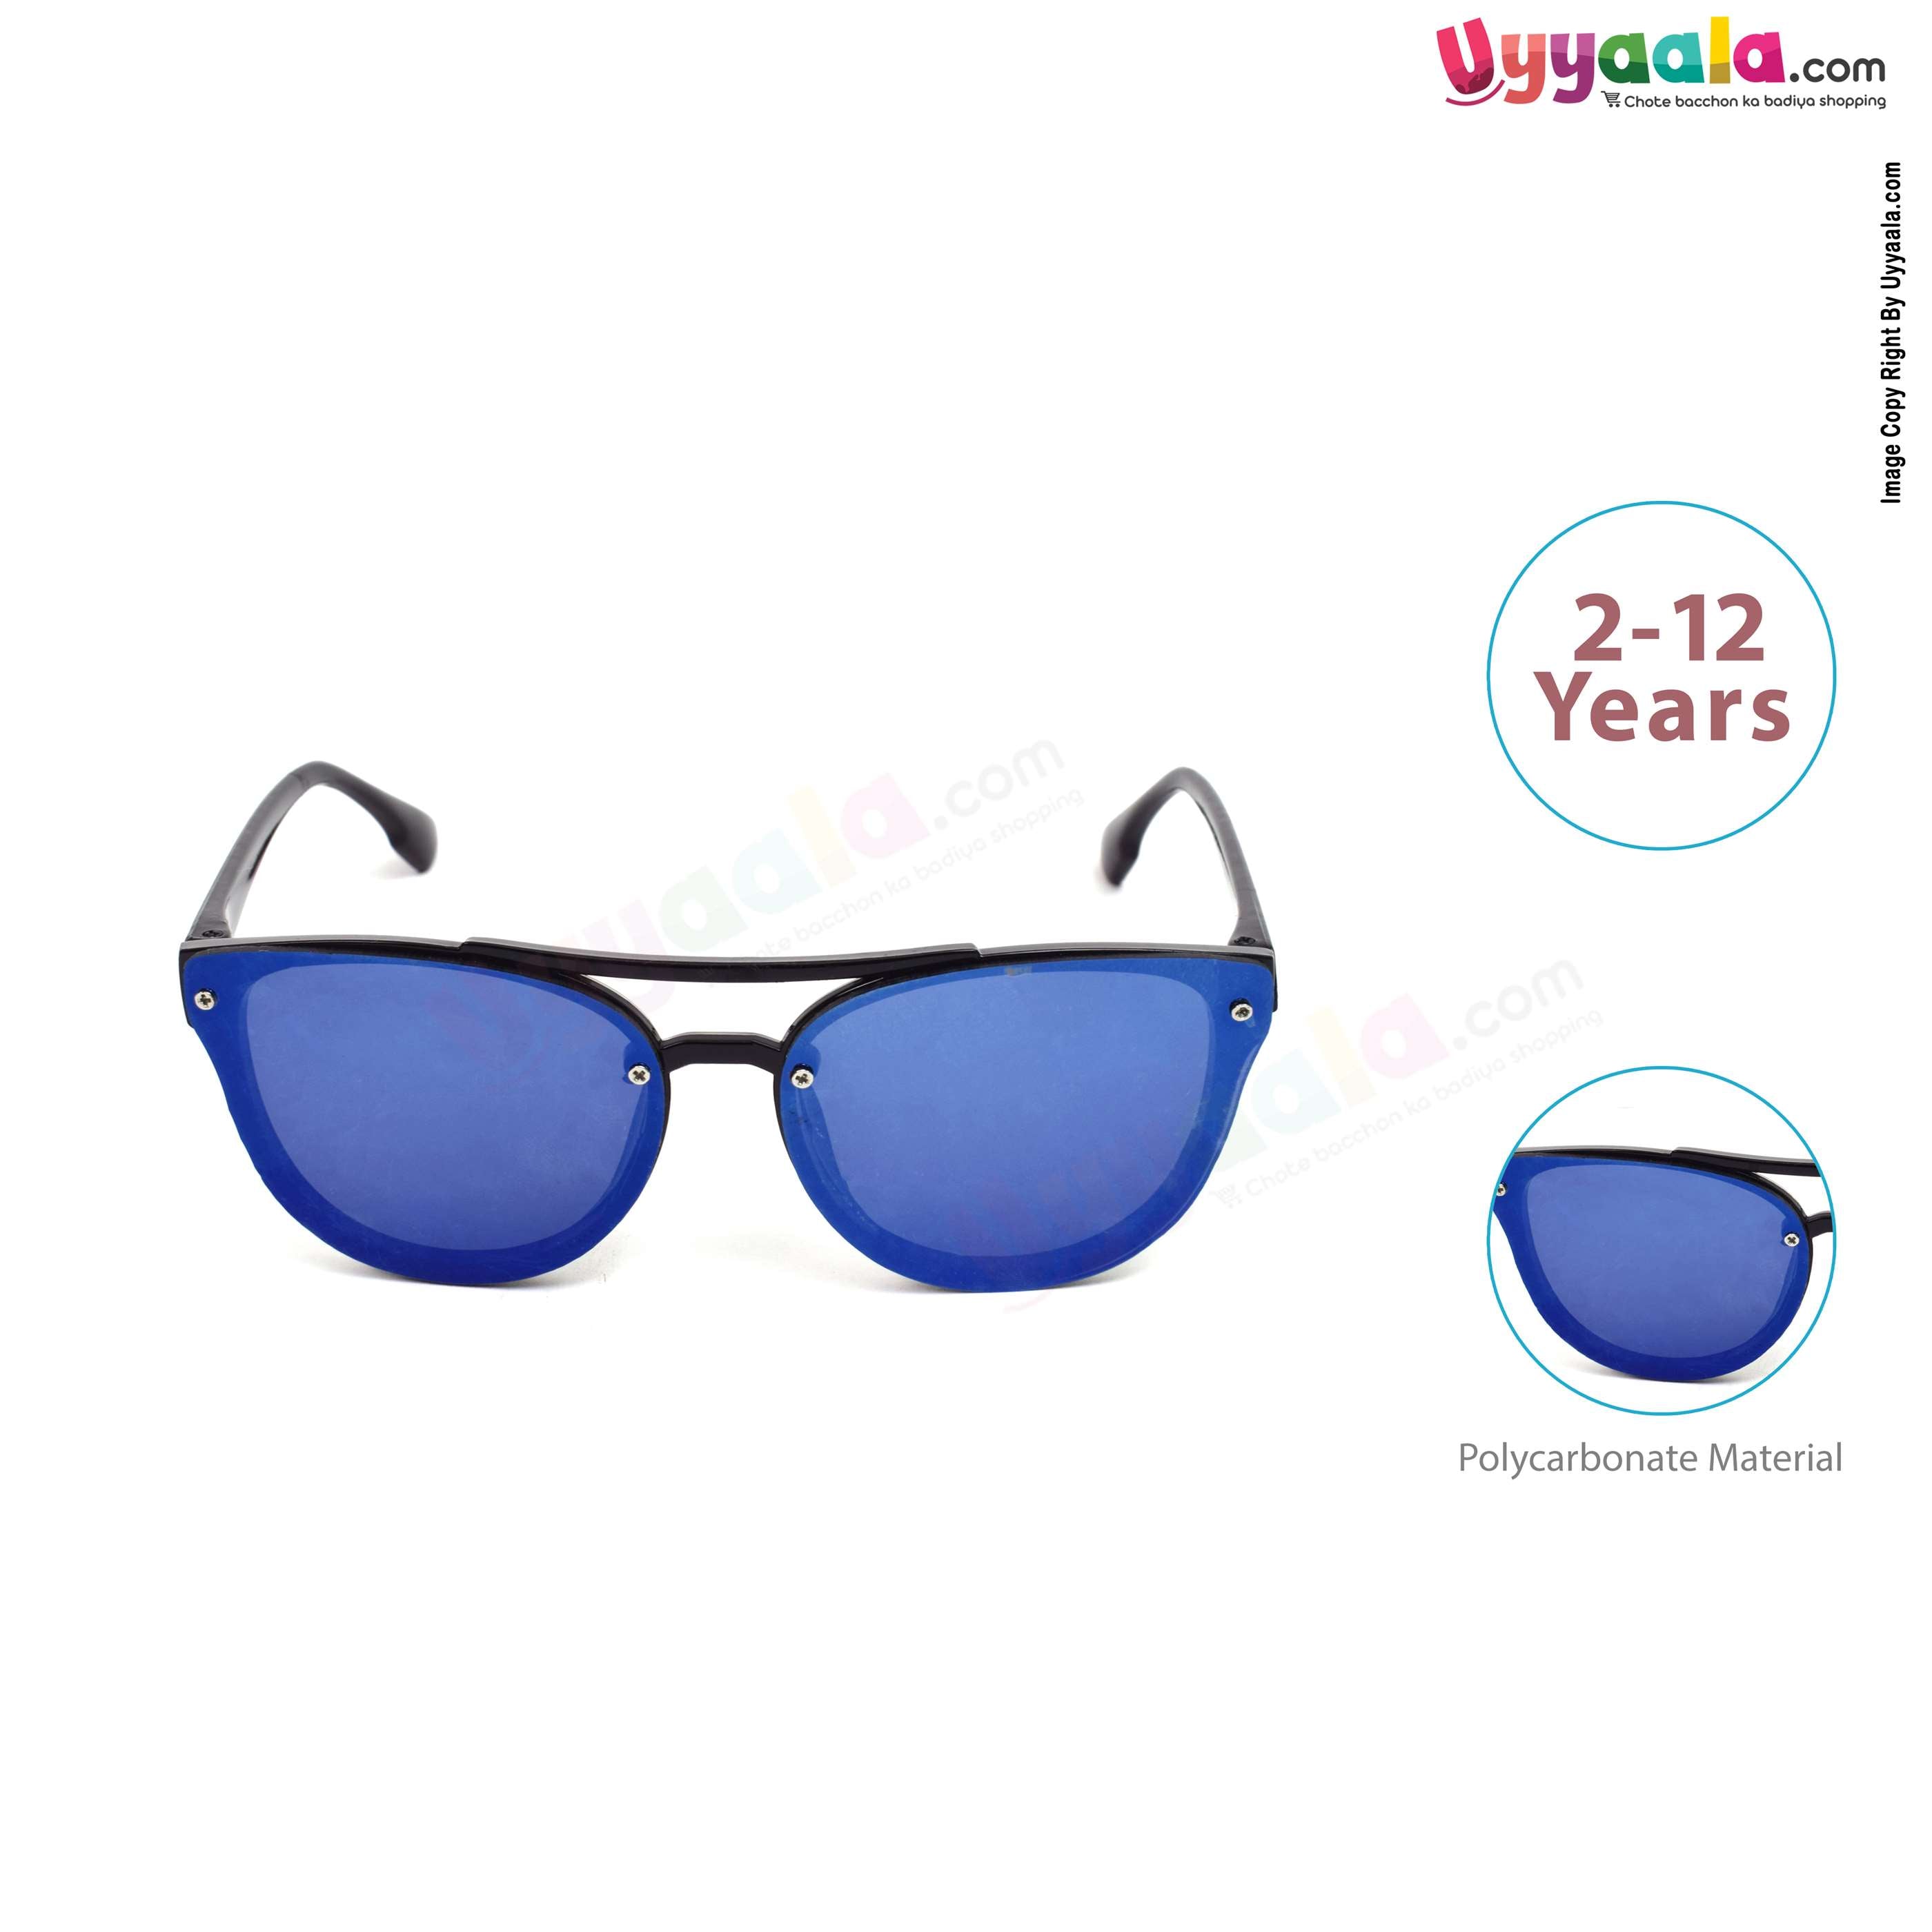 Stylish cat eye shaped tinted goggles for kids